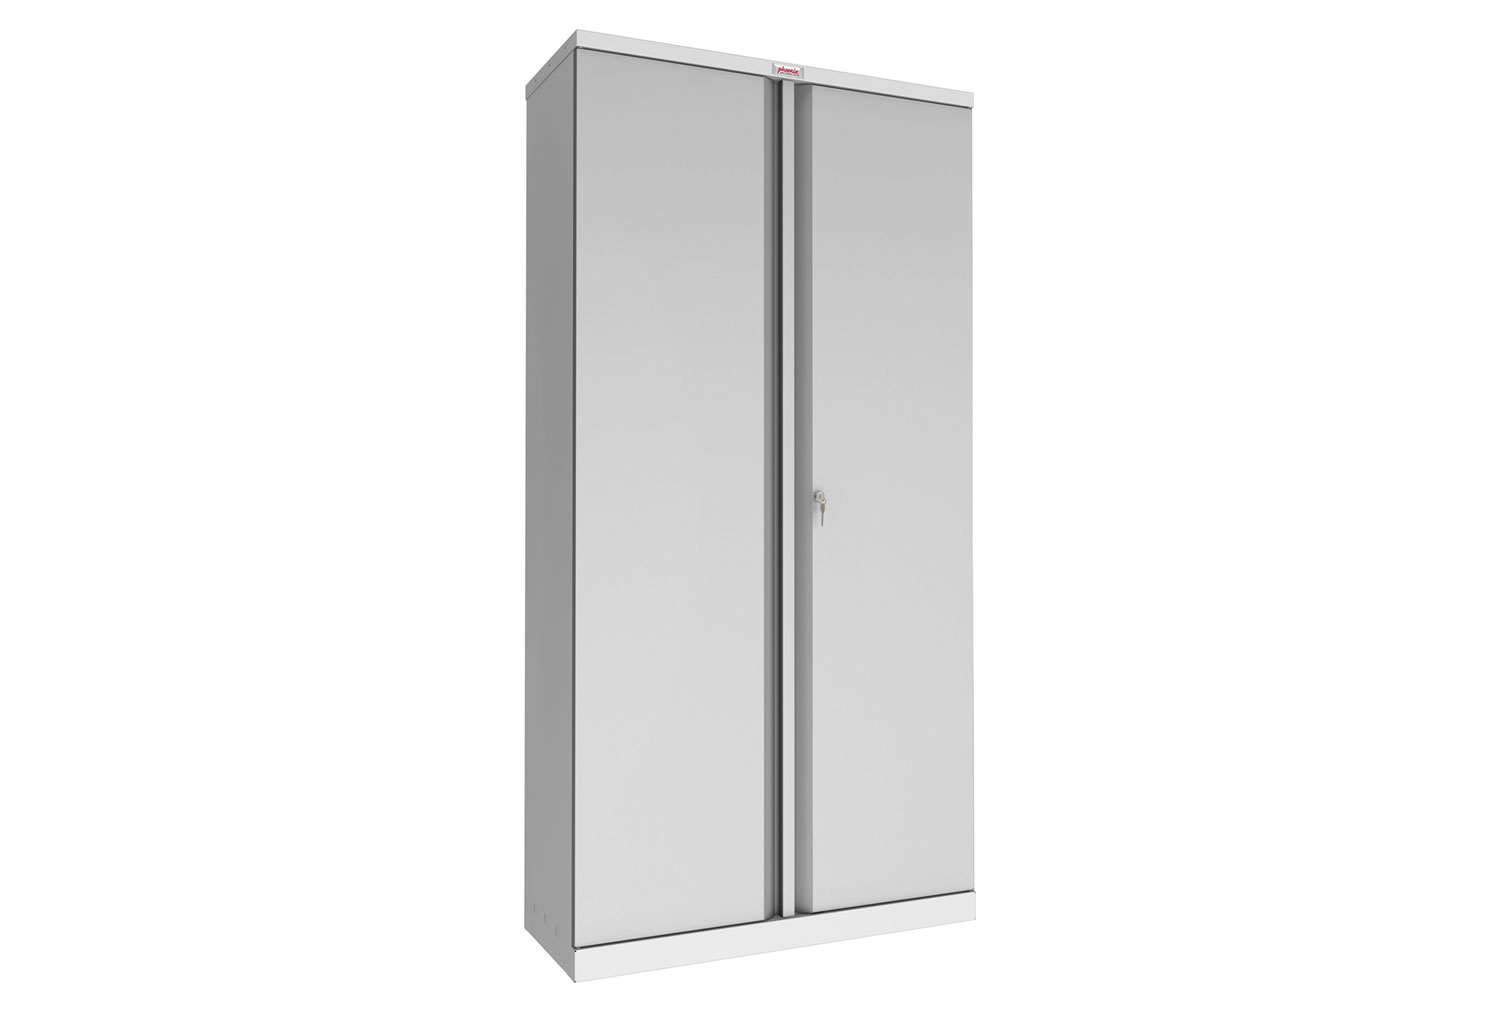 Phoenix SCL Steel Storage Office Cupboards With Key Lock, 4 Shelf - 92wx37dx183h (cm), Grey, Express Delivery